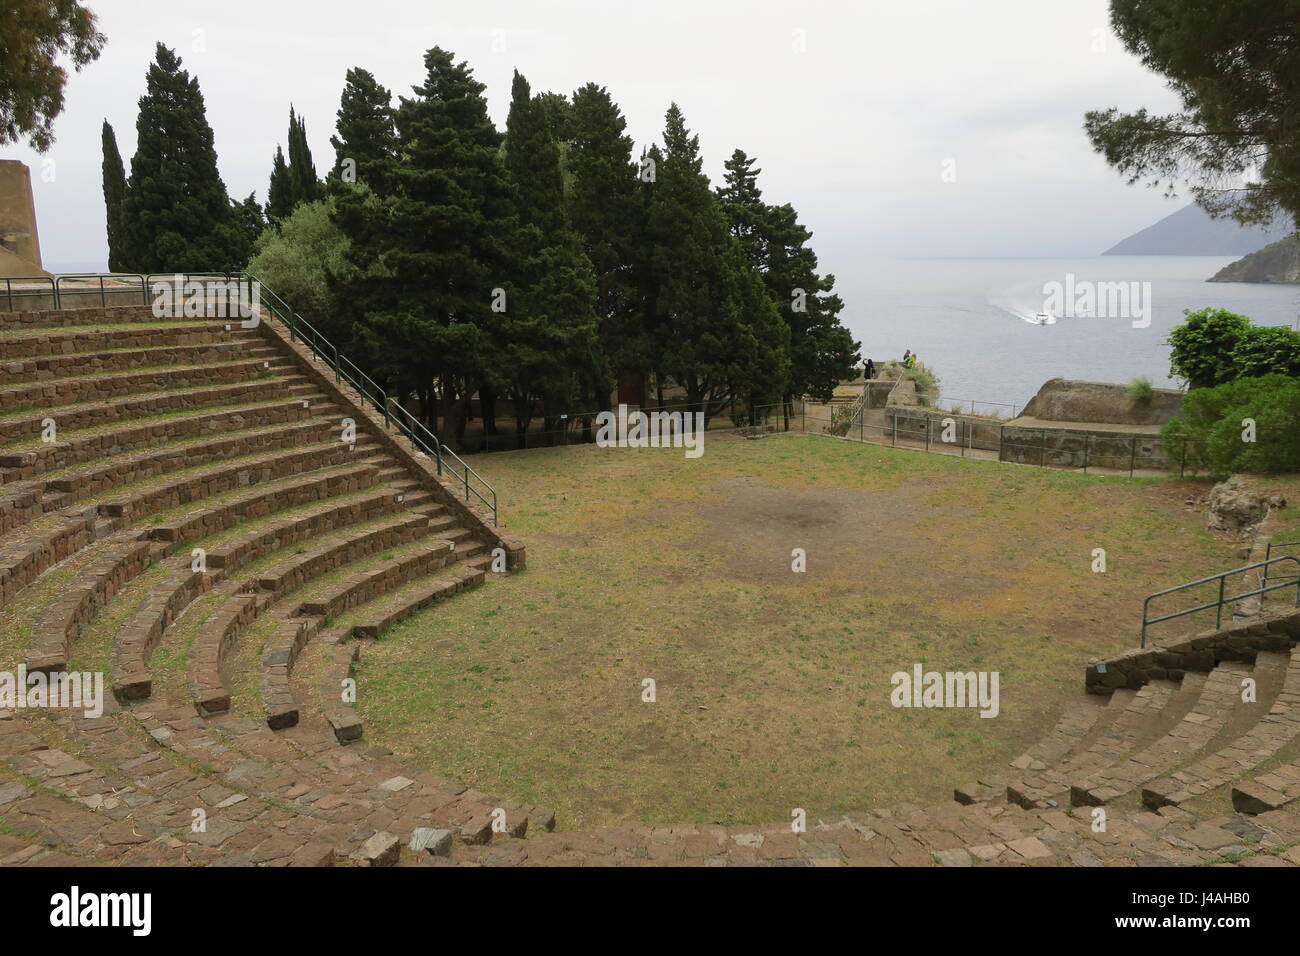 Remains of the theater on a hill in capital of Lipari island in Italy. It dates to Greek period, located on a hill at seaside of a town. Stock Photo